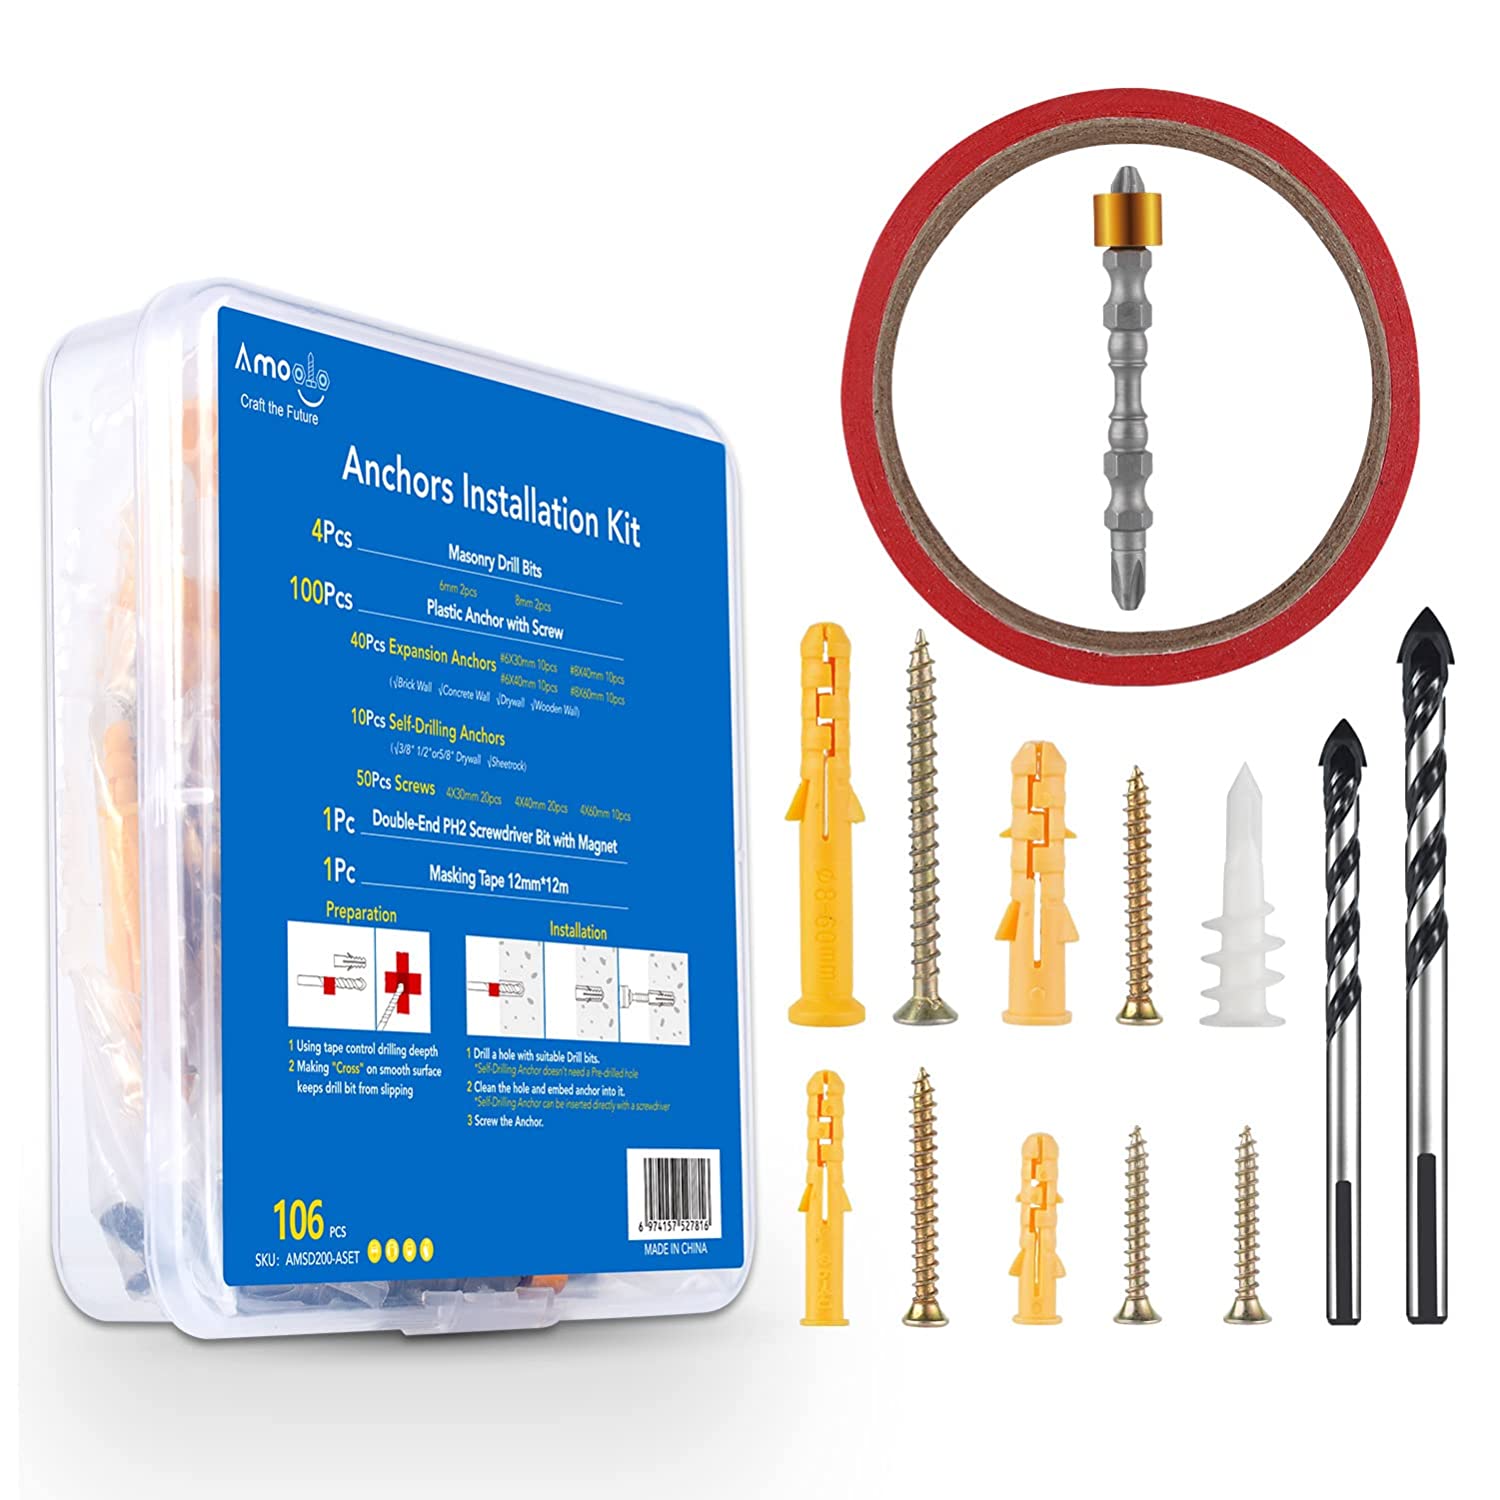 Masonry Drill Bit with Concrete Anchors and Screws Kit